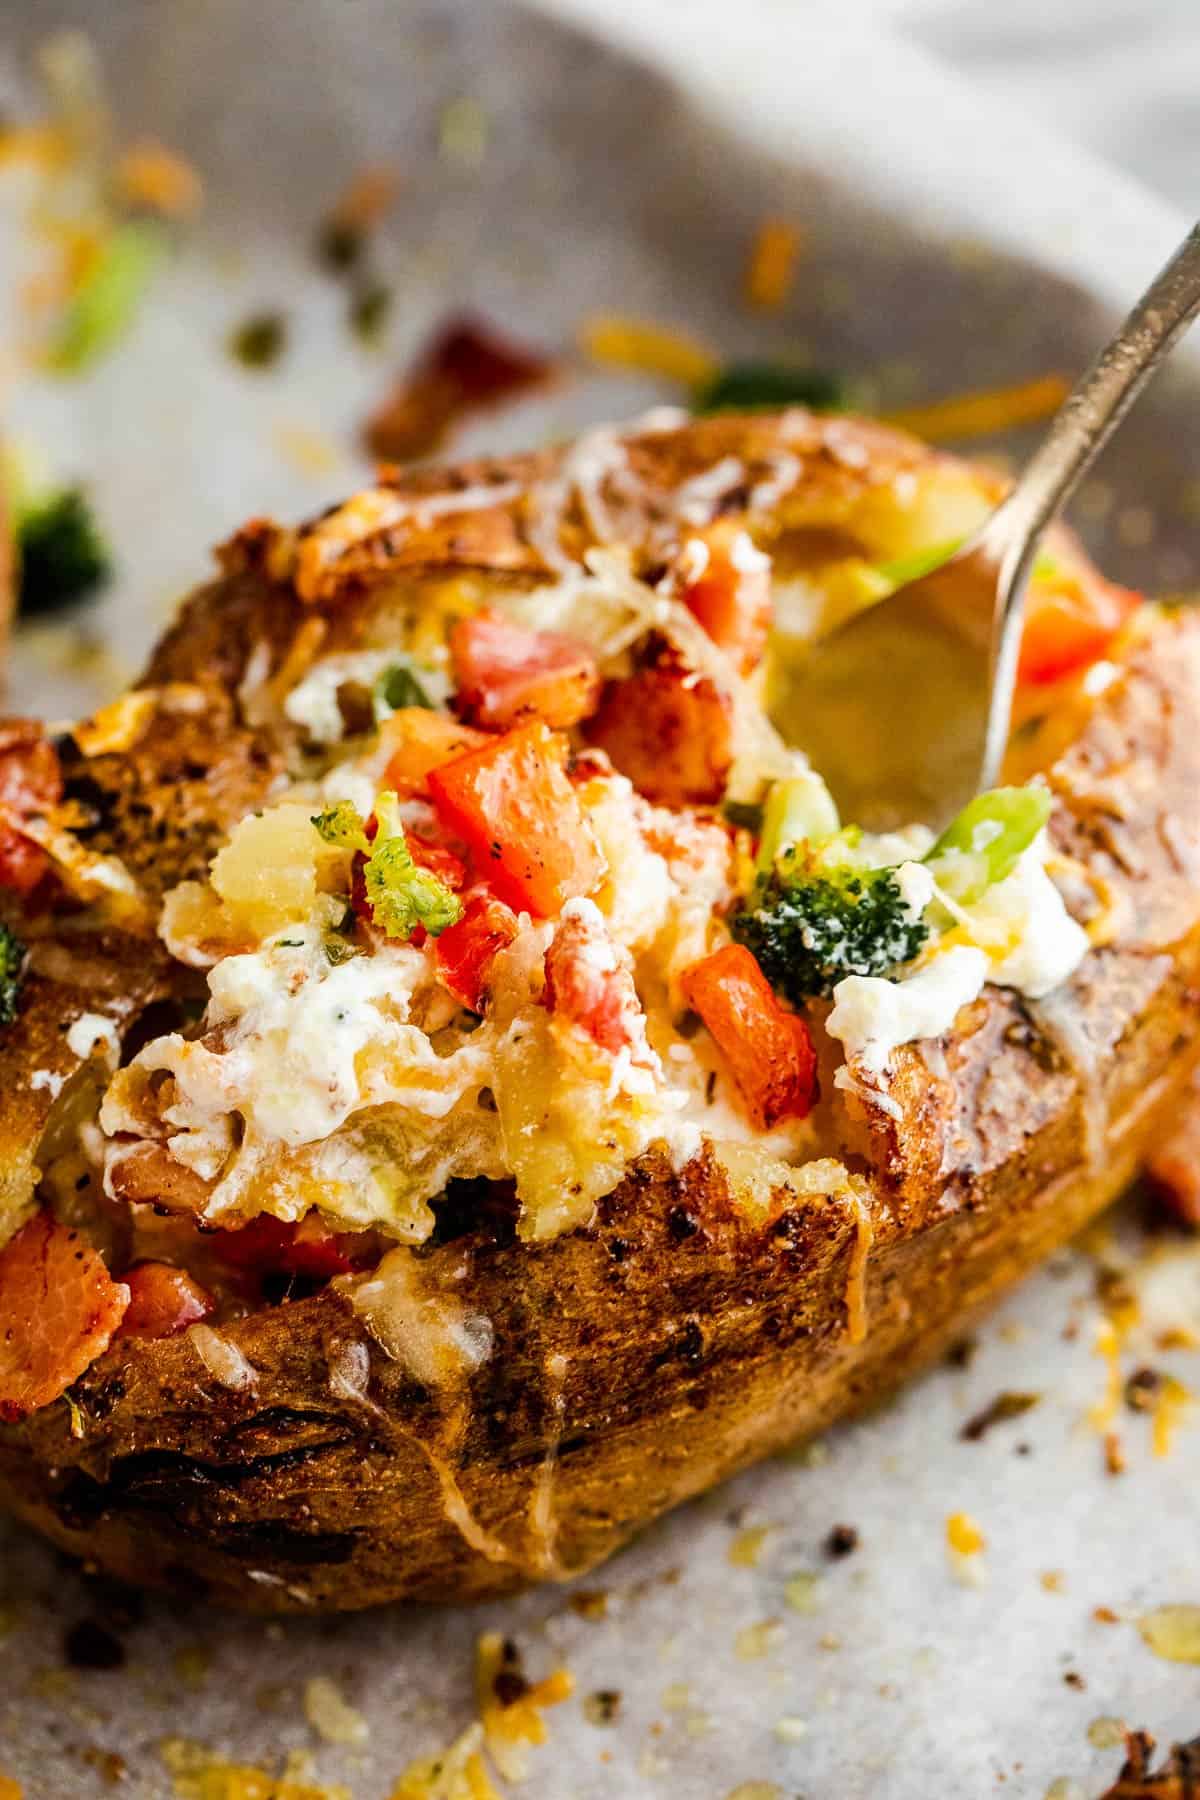 baked potato loaded with bacon, broccoli, and cheese.